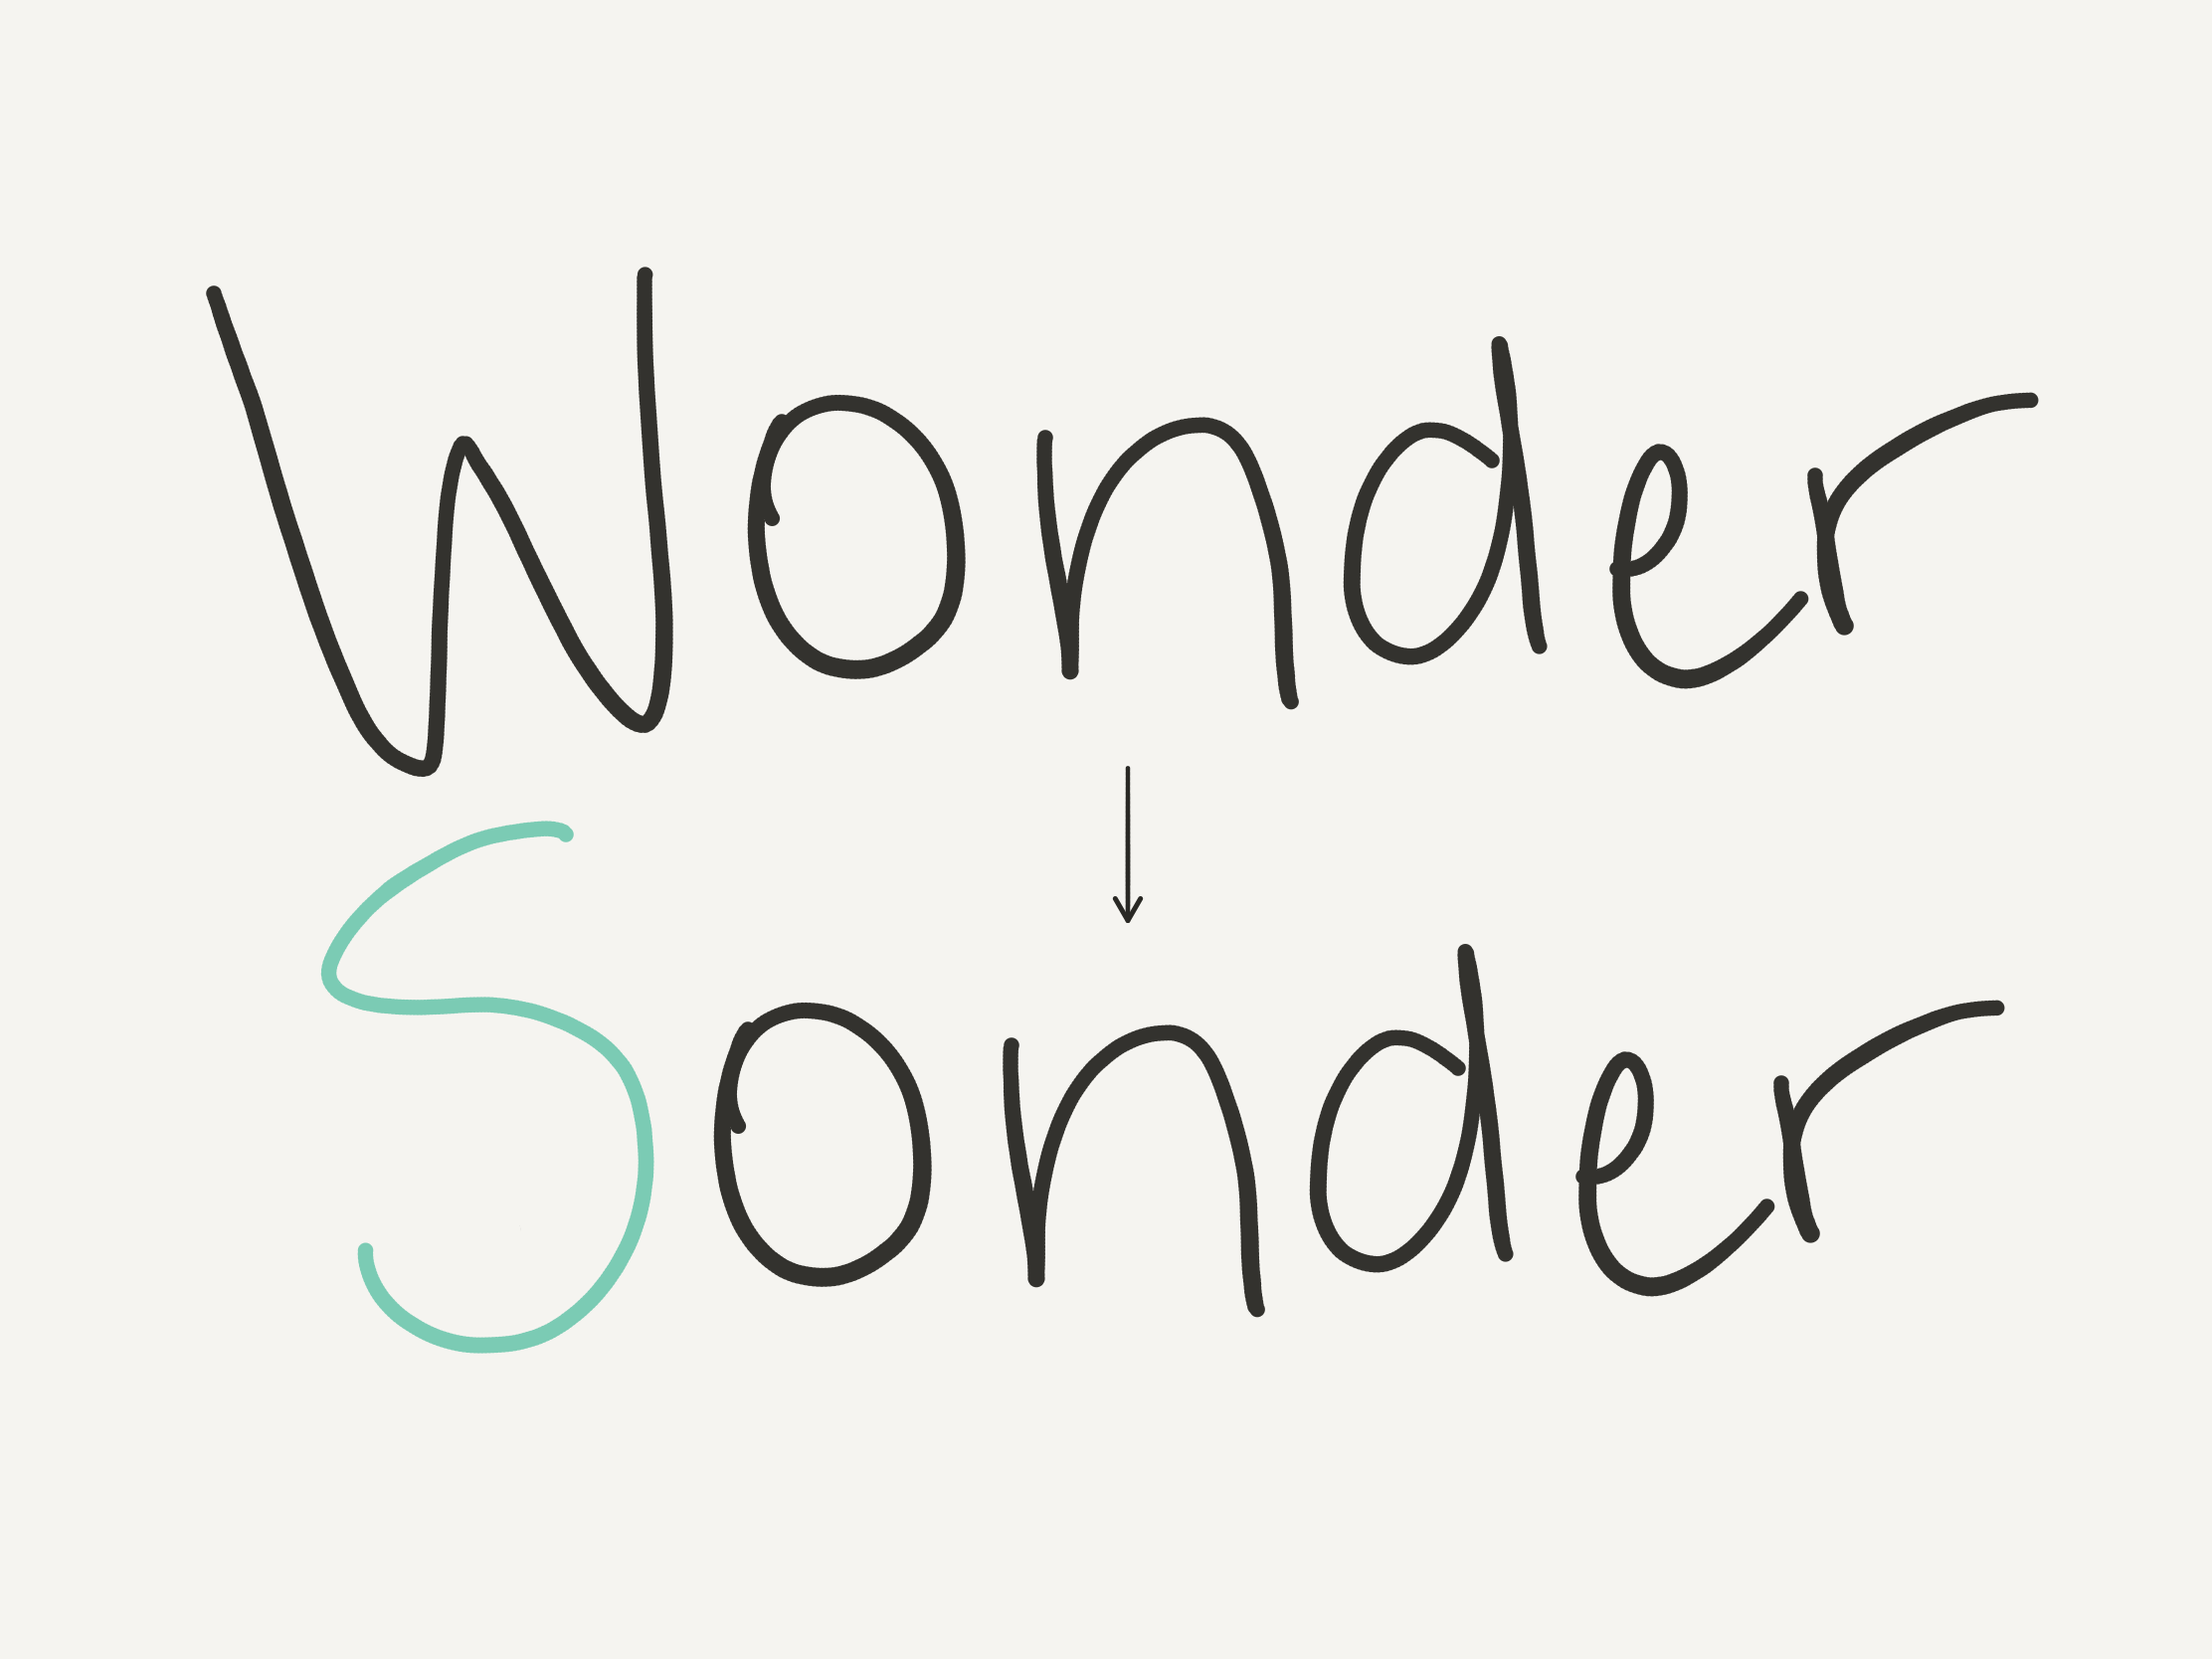 Like Wonder with an S